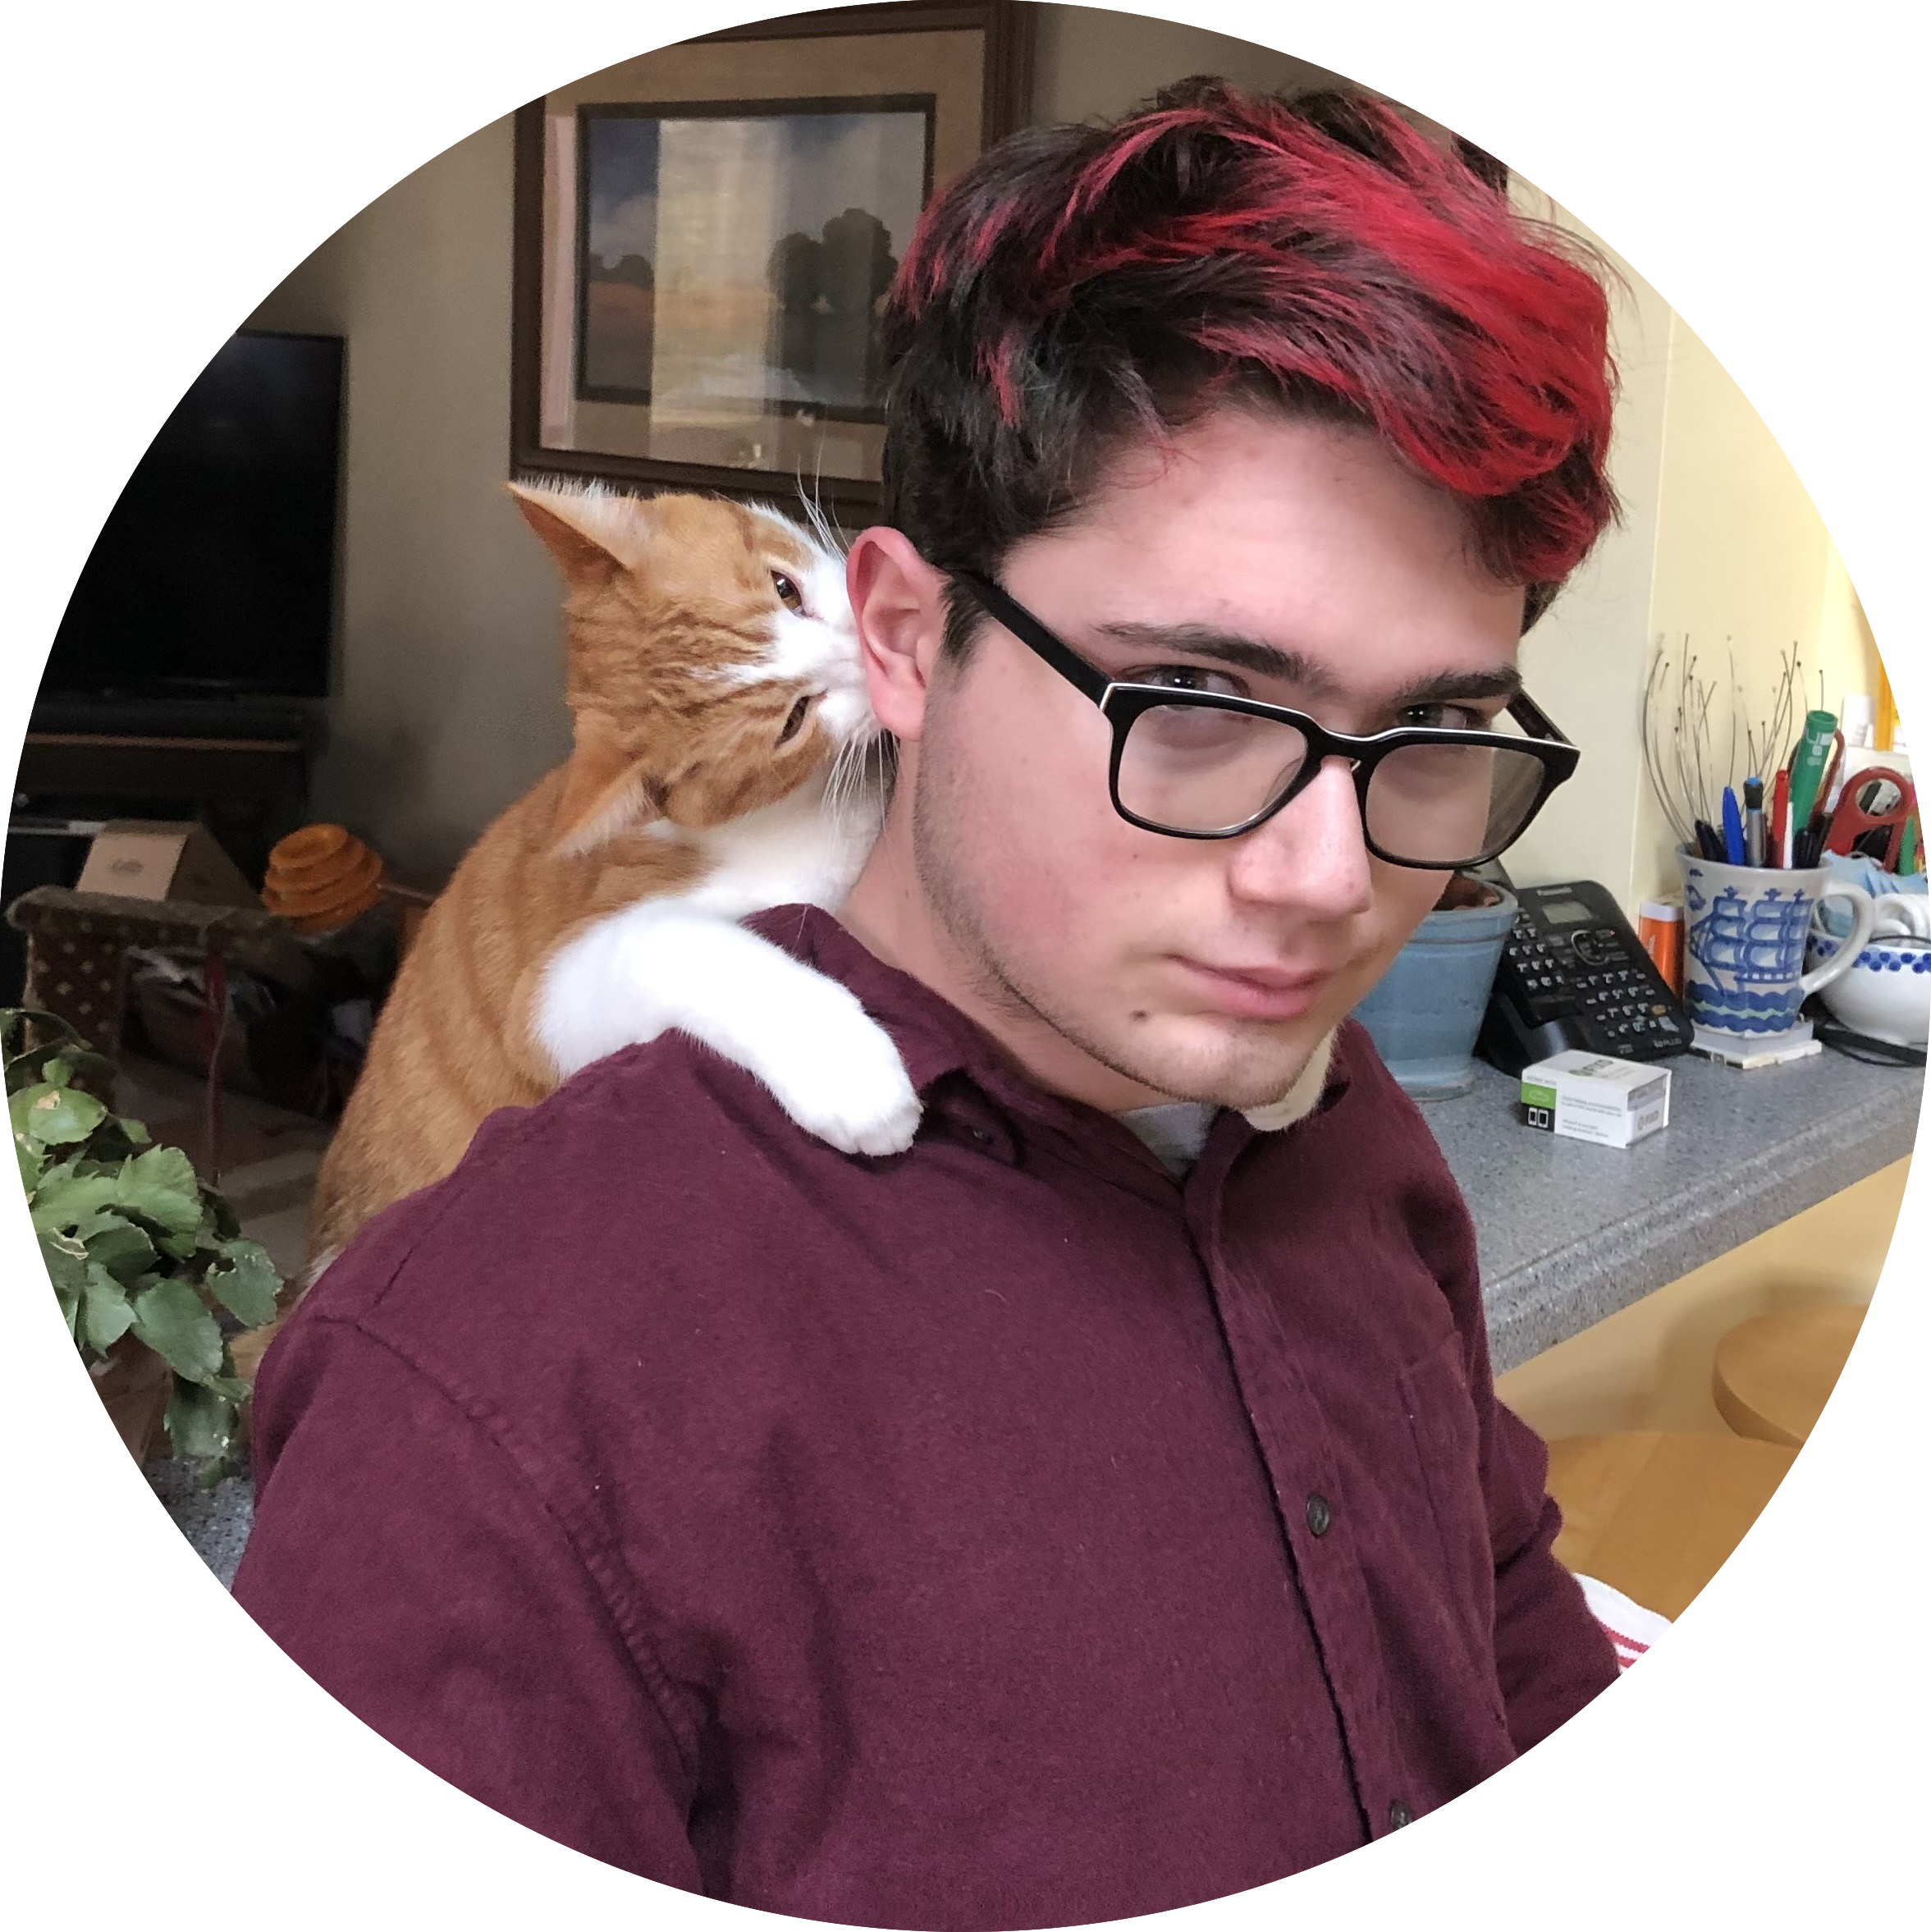 A light skinned masc presenting person with red hair and glasses; a cat is standing behind him with its paws on his shoulders, biting his head.